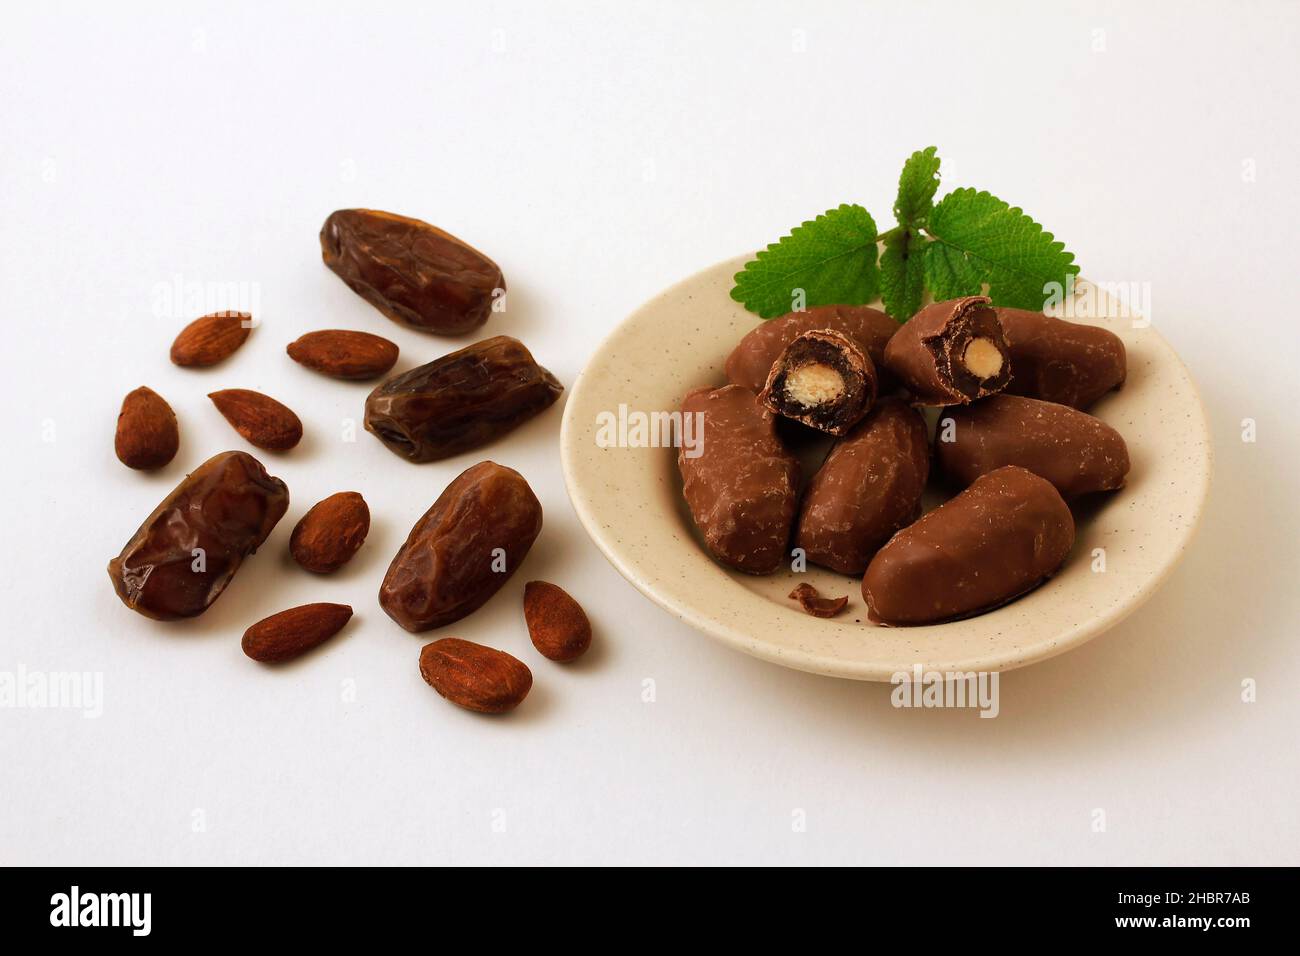 Dates with almond. Covered with milk chocolate. Stock Photo